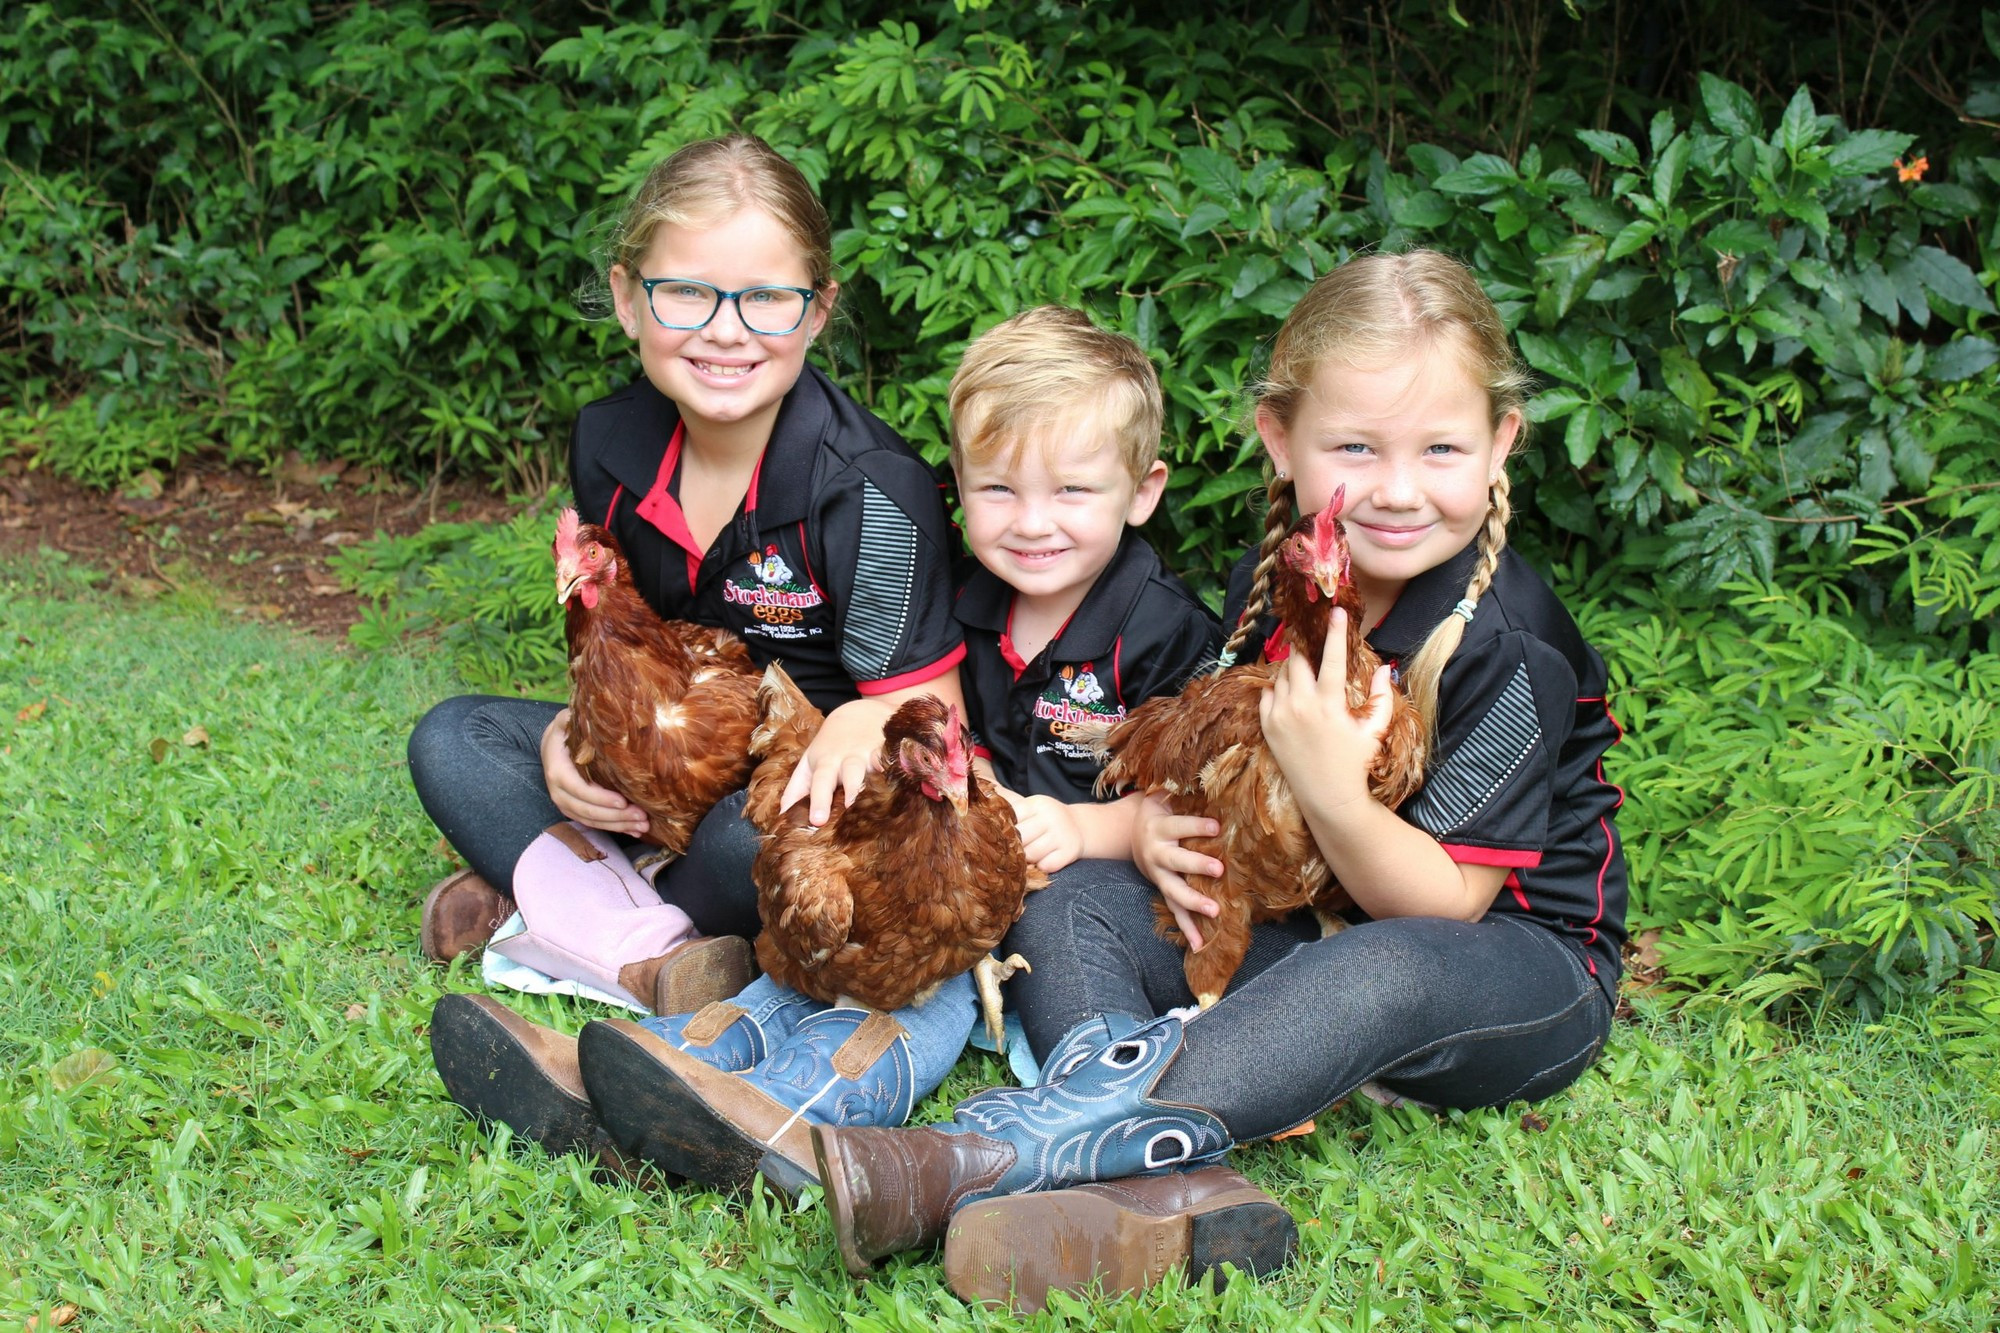 Backyard chicken owners reminded to wash their hands. - feature photo